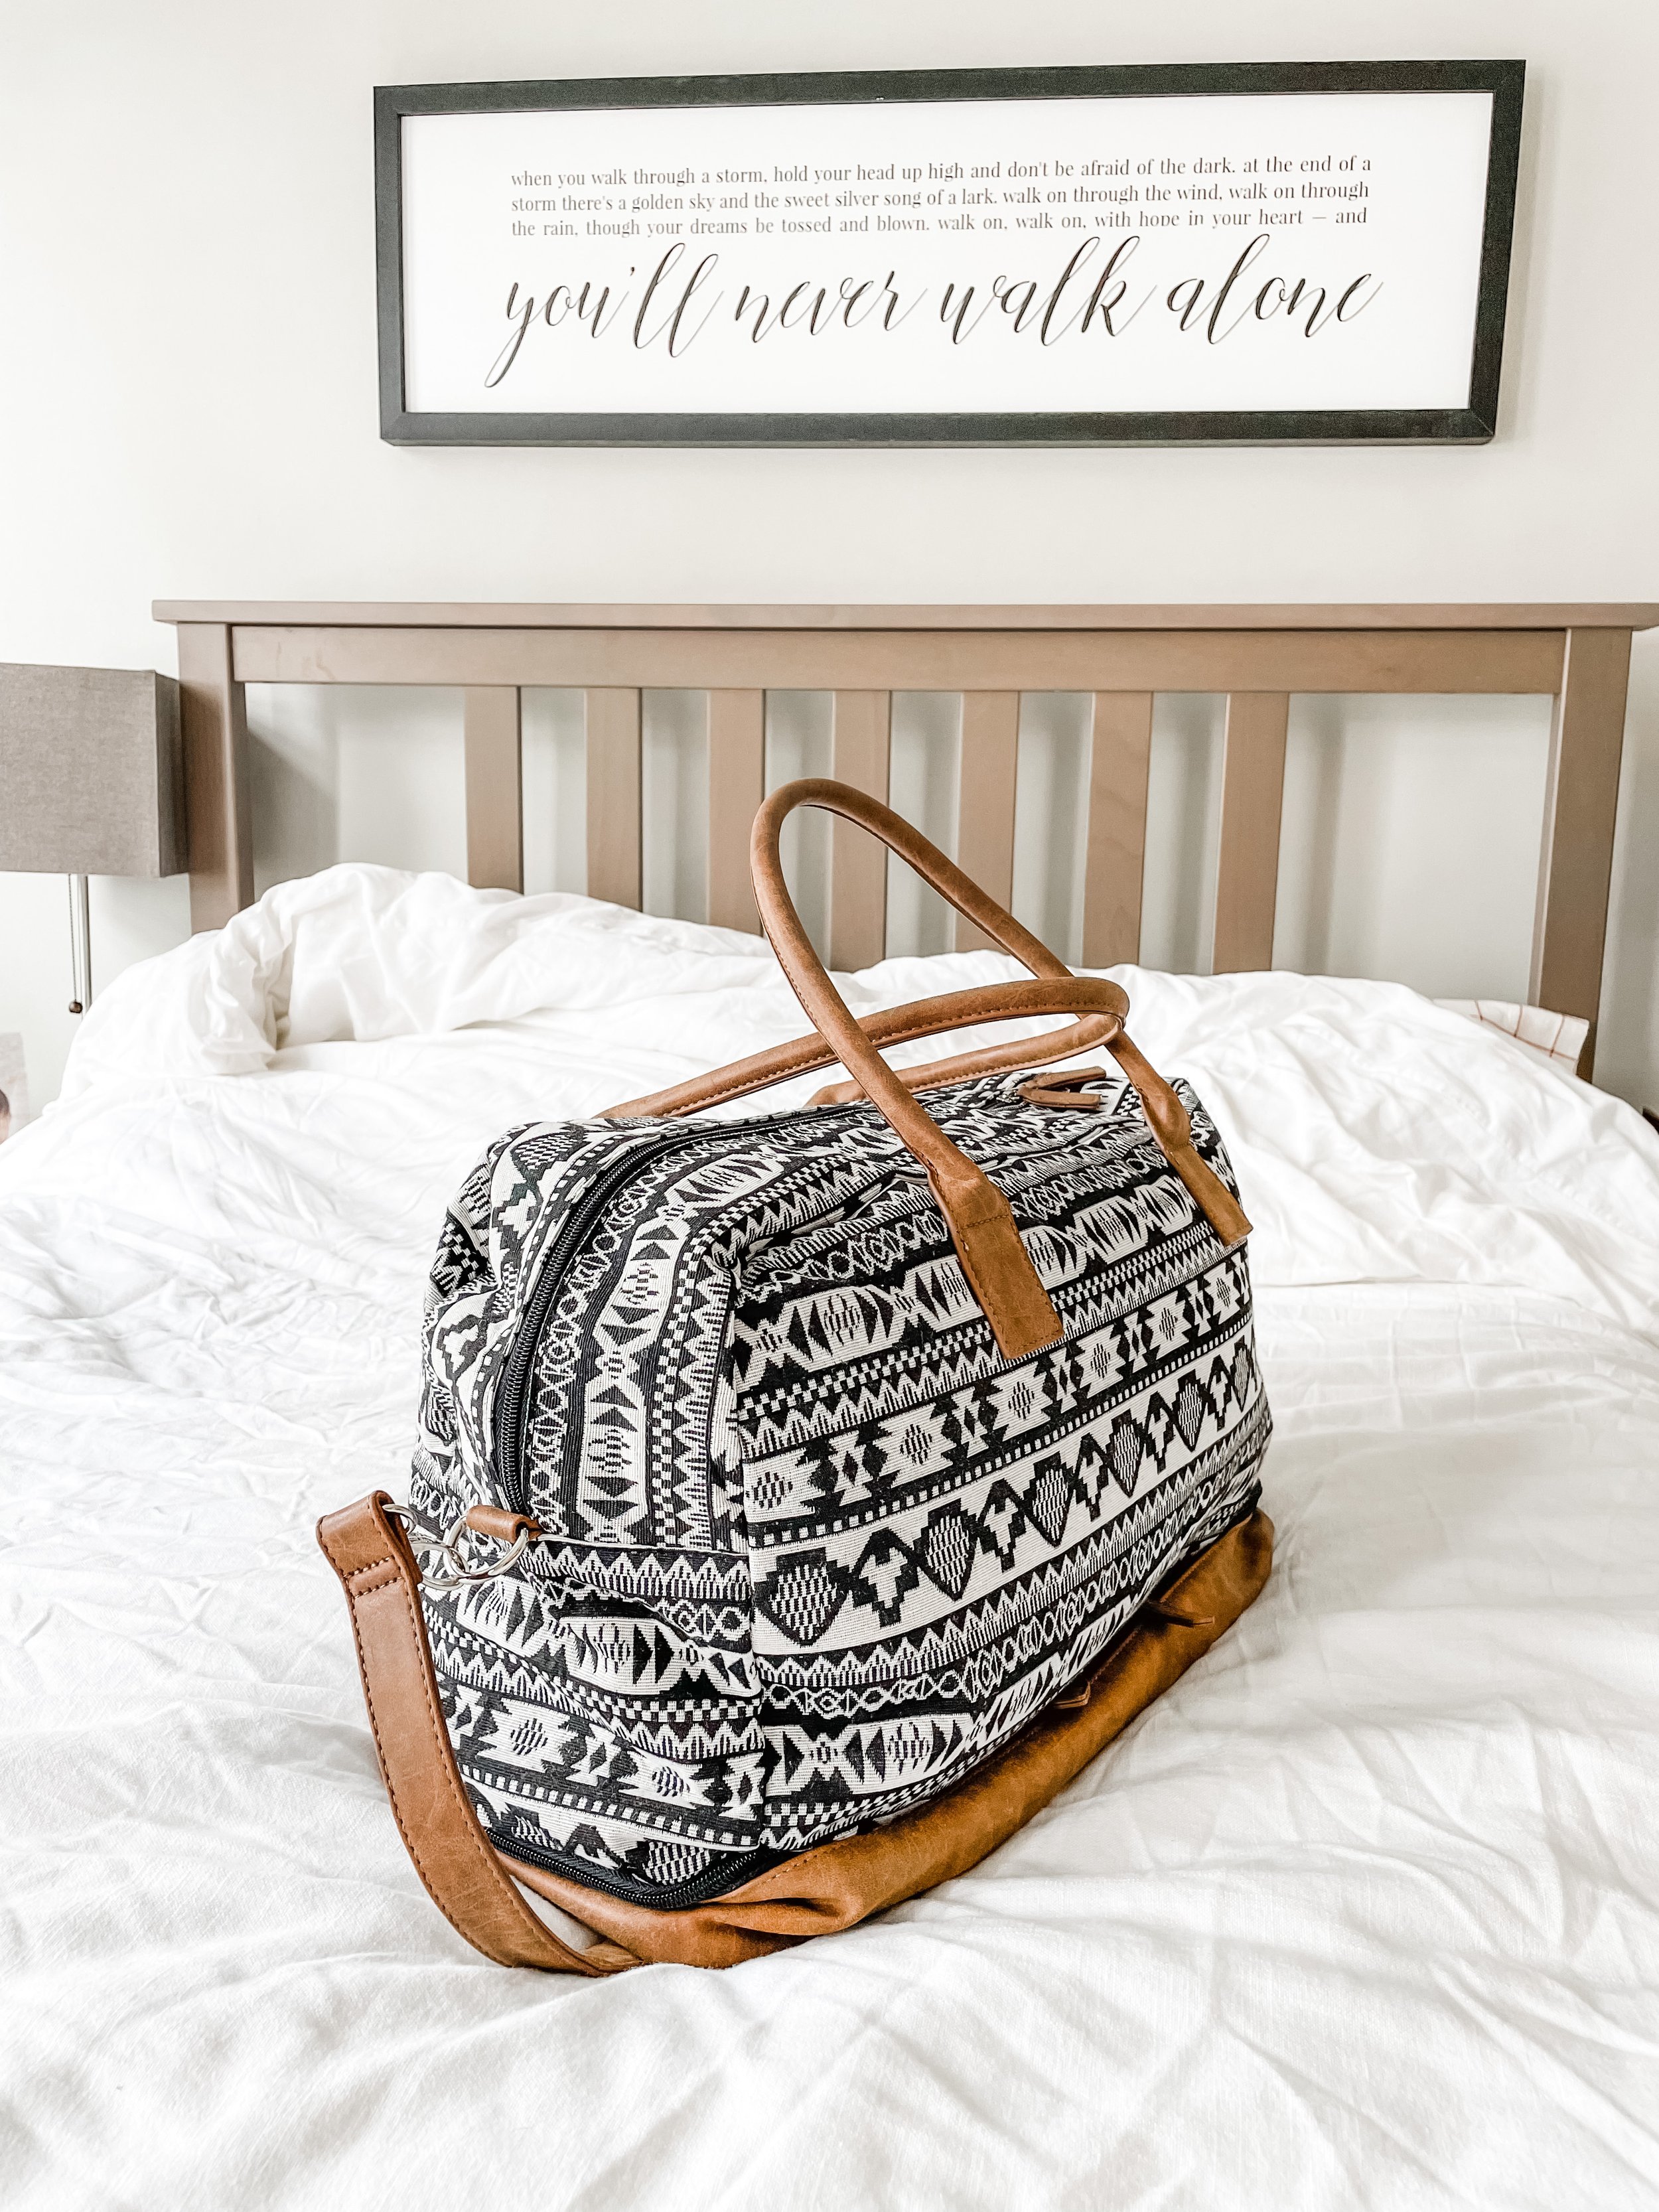 Cute Overnight Bag for Hospital Stay